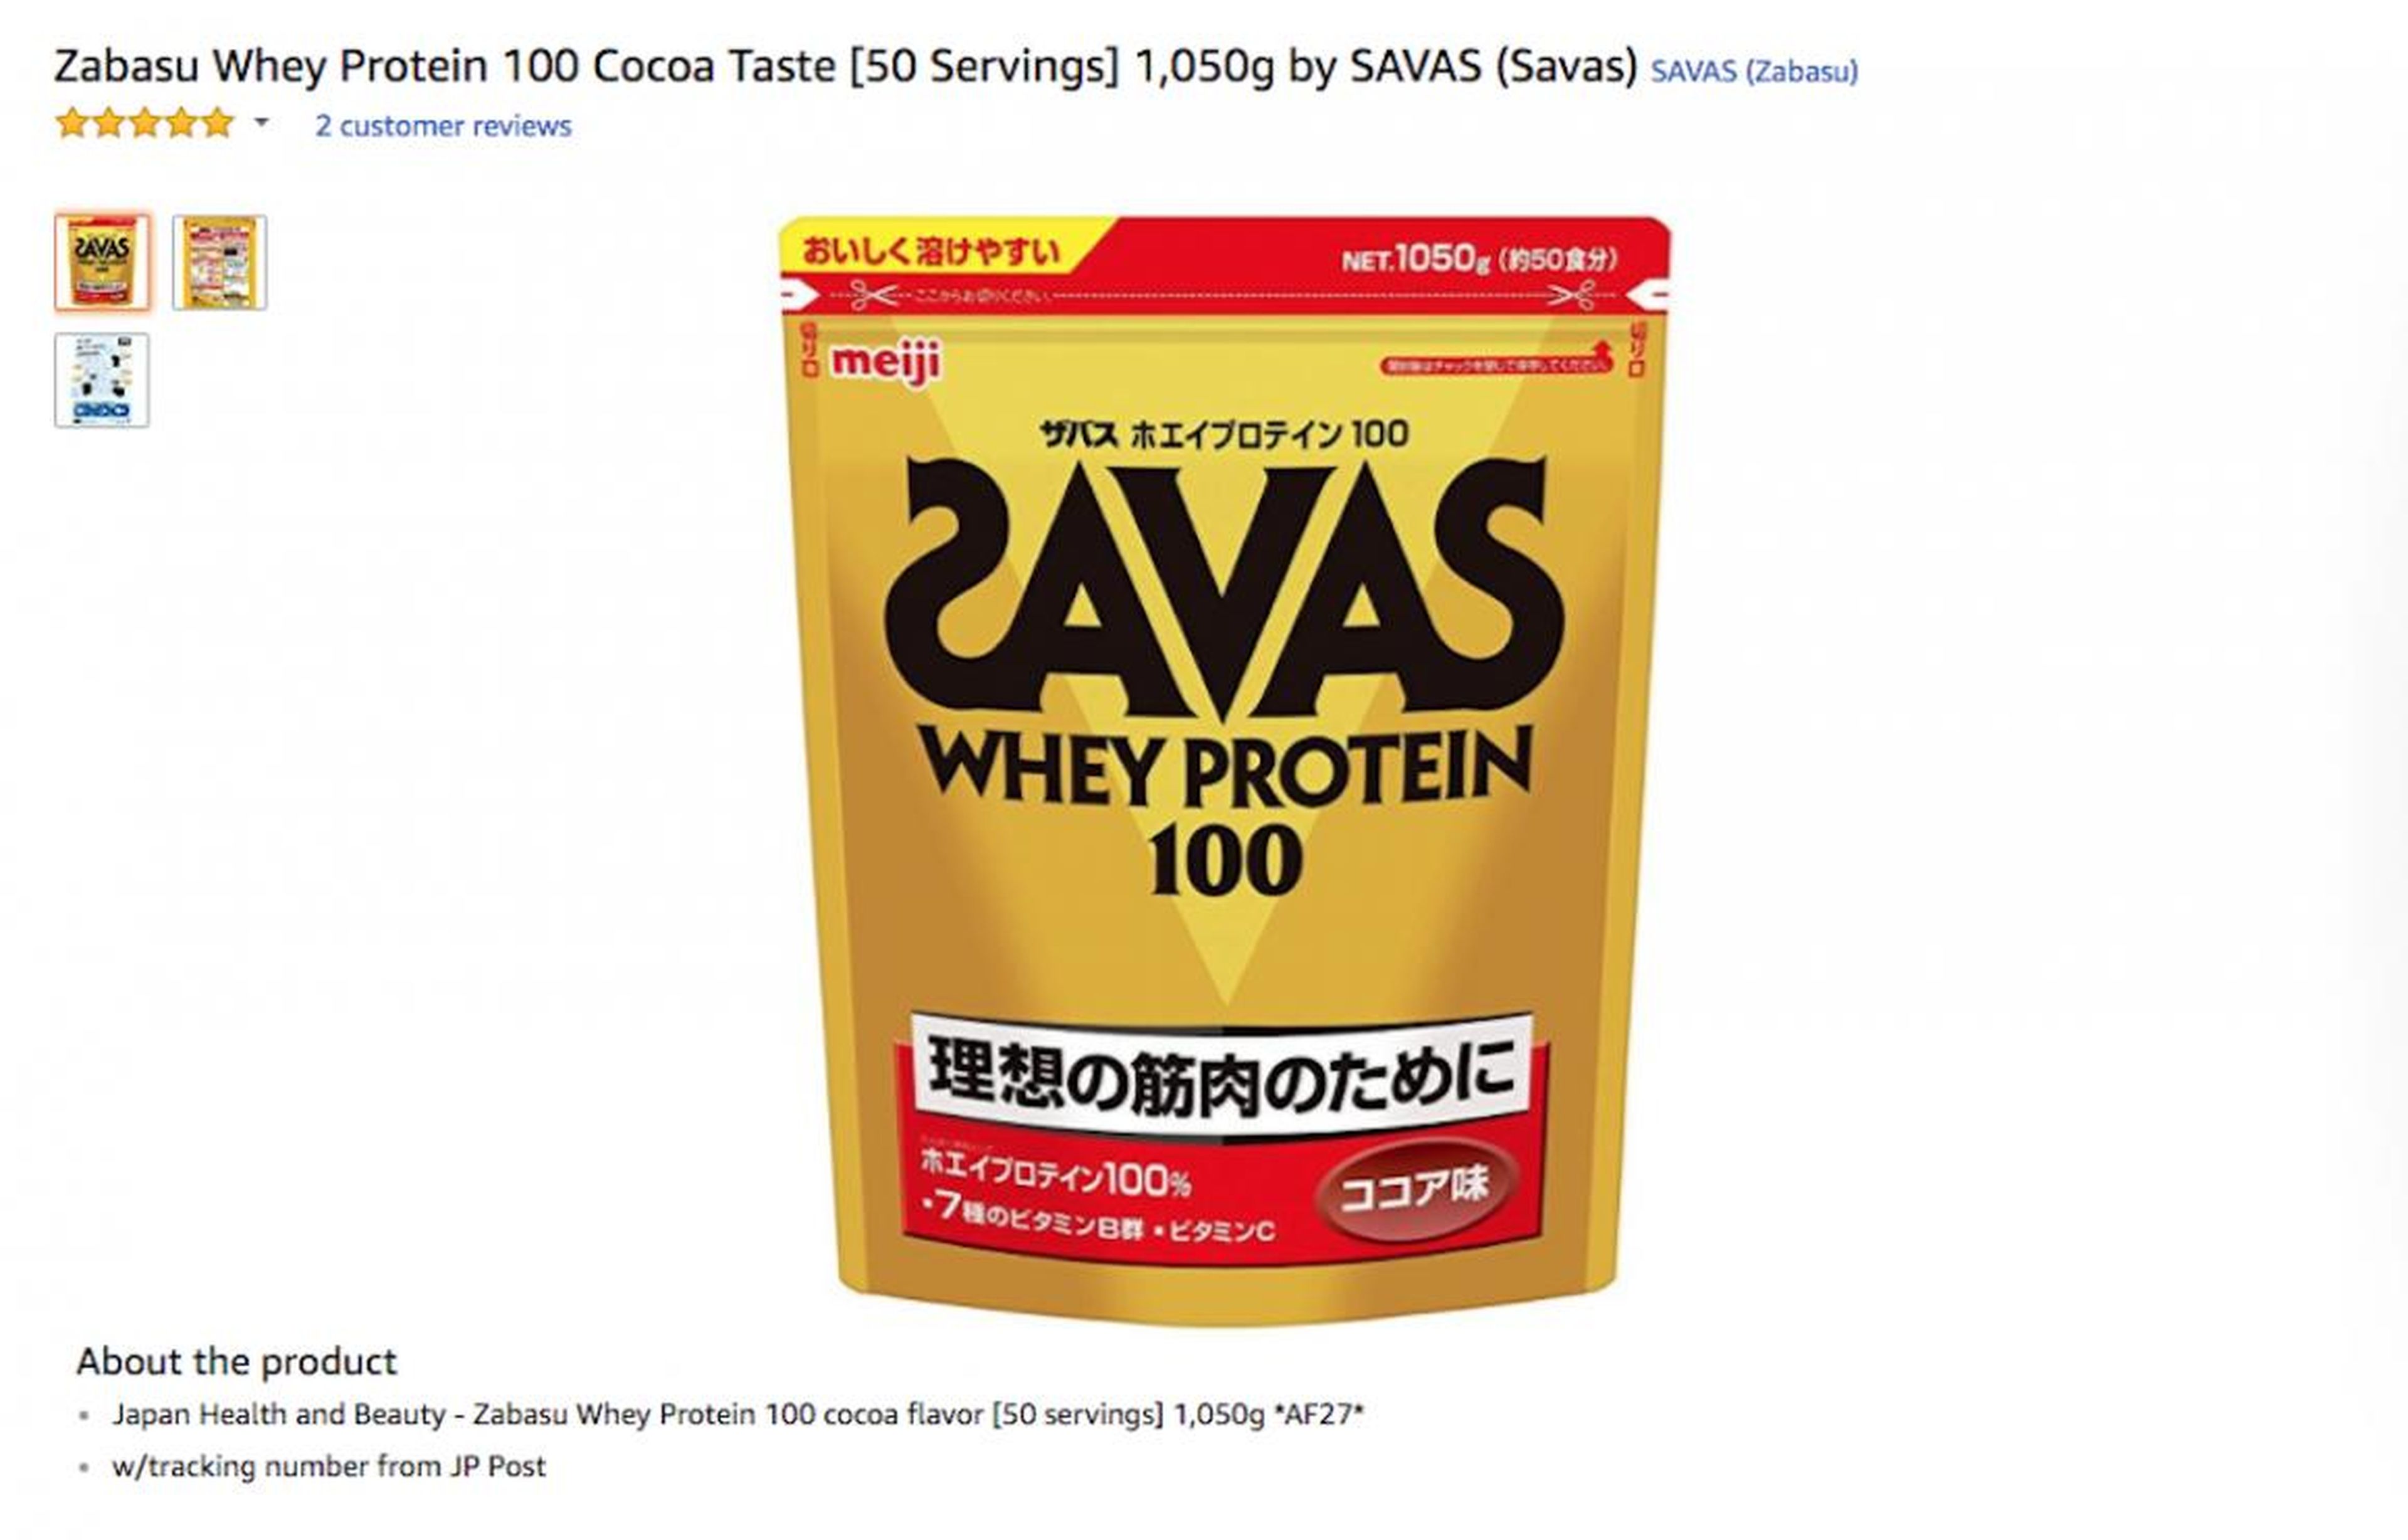 They also bought a ton of <a href="https://amzn.to/2zOCaSX">SAVAS Whey Protein 100</a> in the cocoa flavor in Japan.